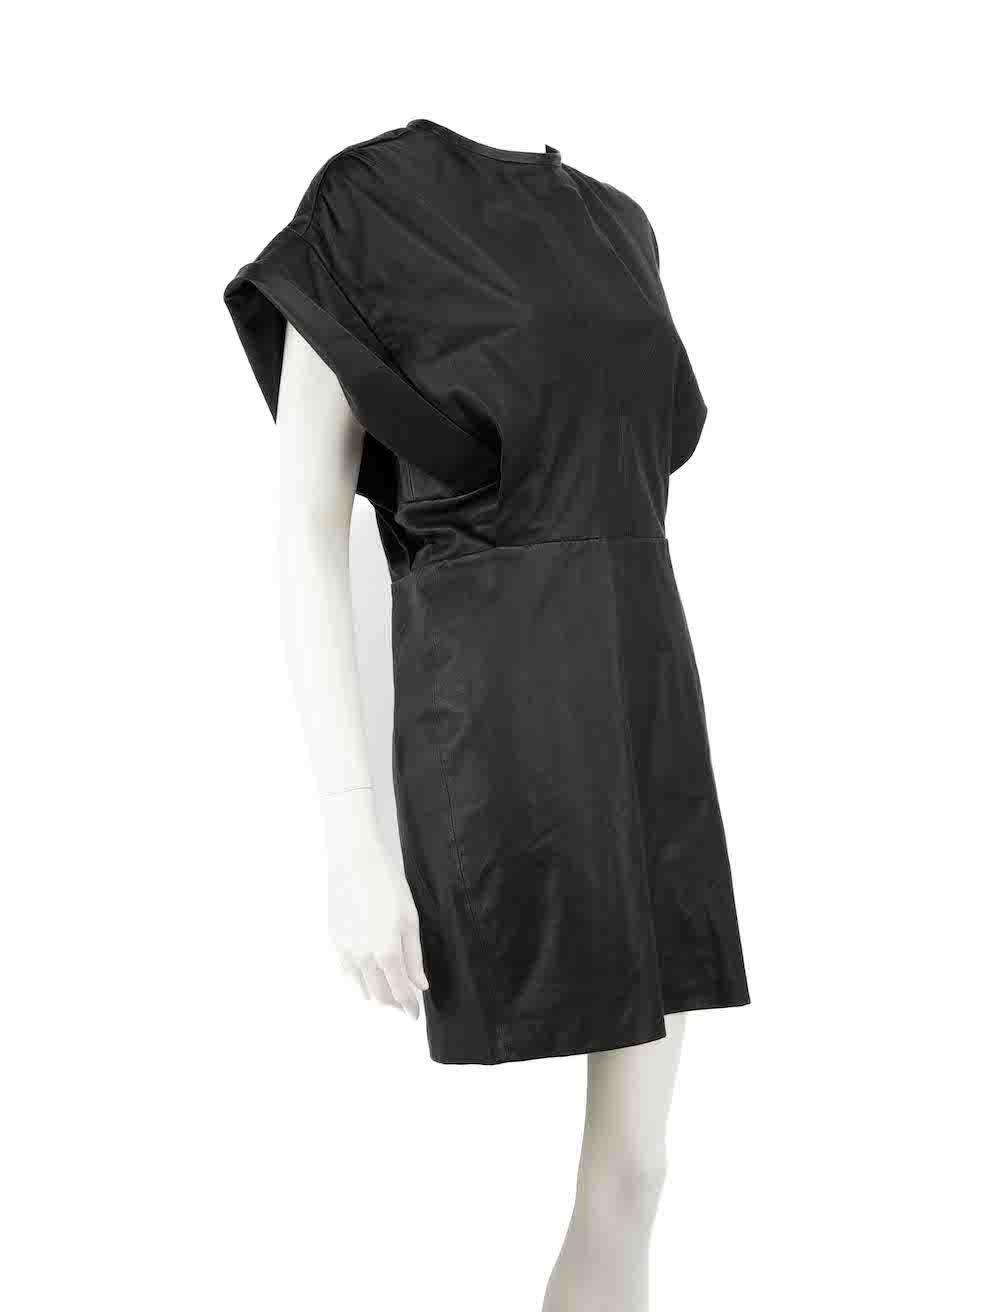 CONDITION is Never worn, with tags. No visible wear to dress is evident on this new Iro designer resale item.
 
 
 
 Details
 
 
 AW/21
 
 Black
 
 Leather
 
 Mini dress
 
 Round neckline
 
 Back zip closure
 
 
 
 
 
 Made in Turkey
 
 
 
